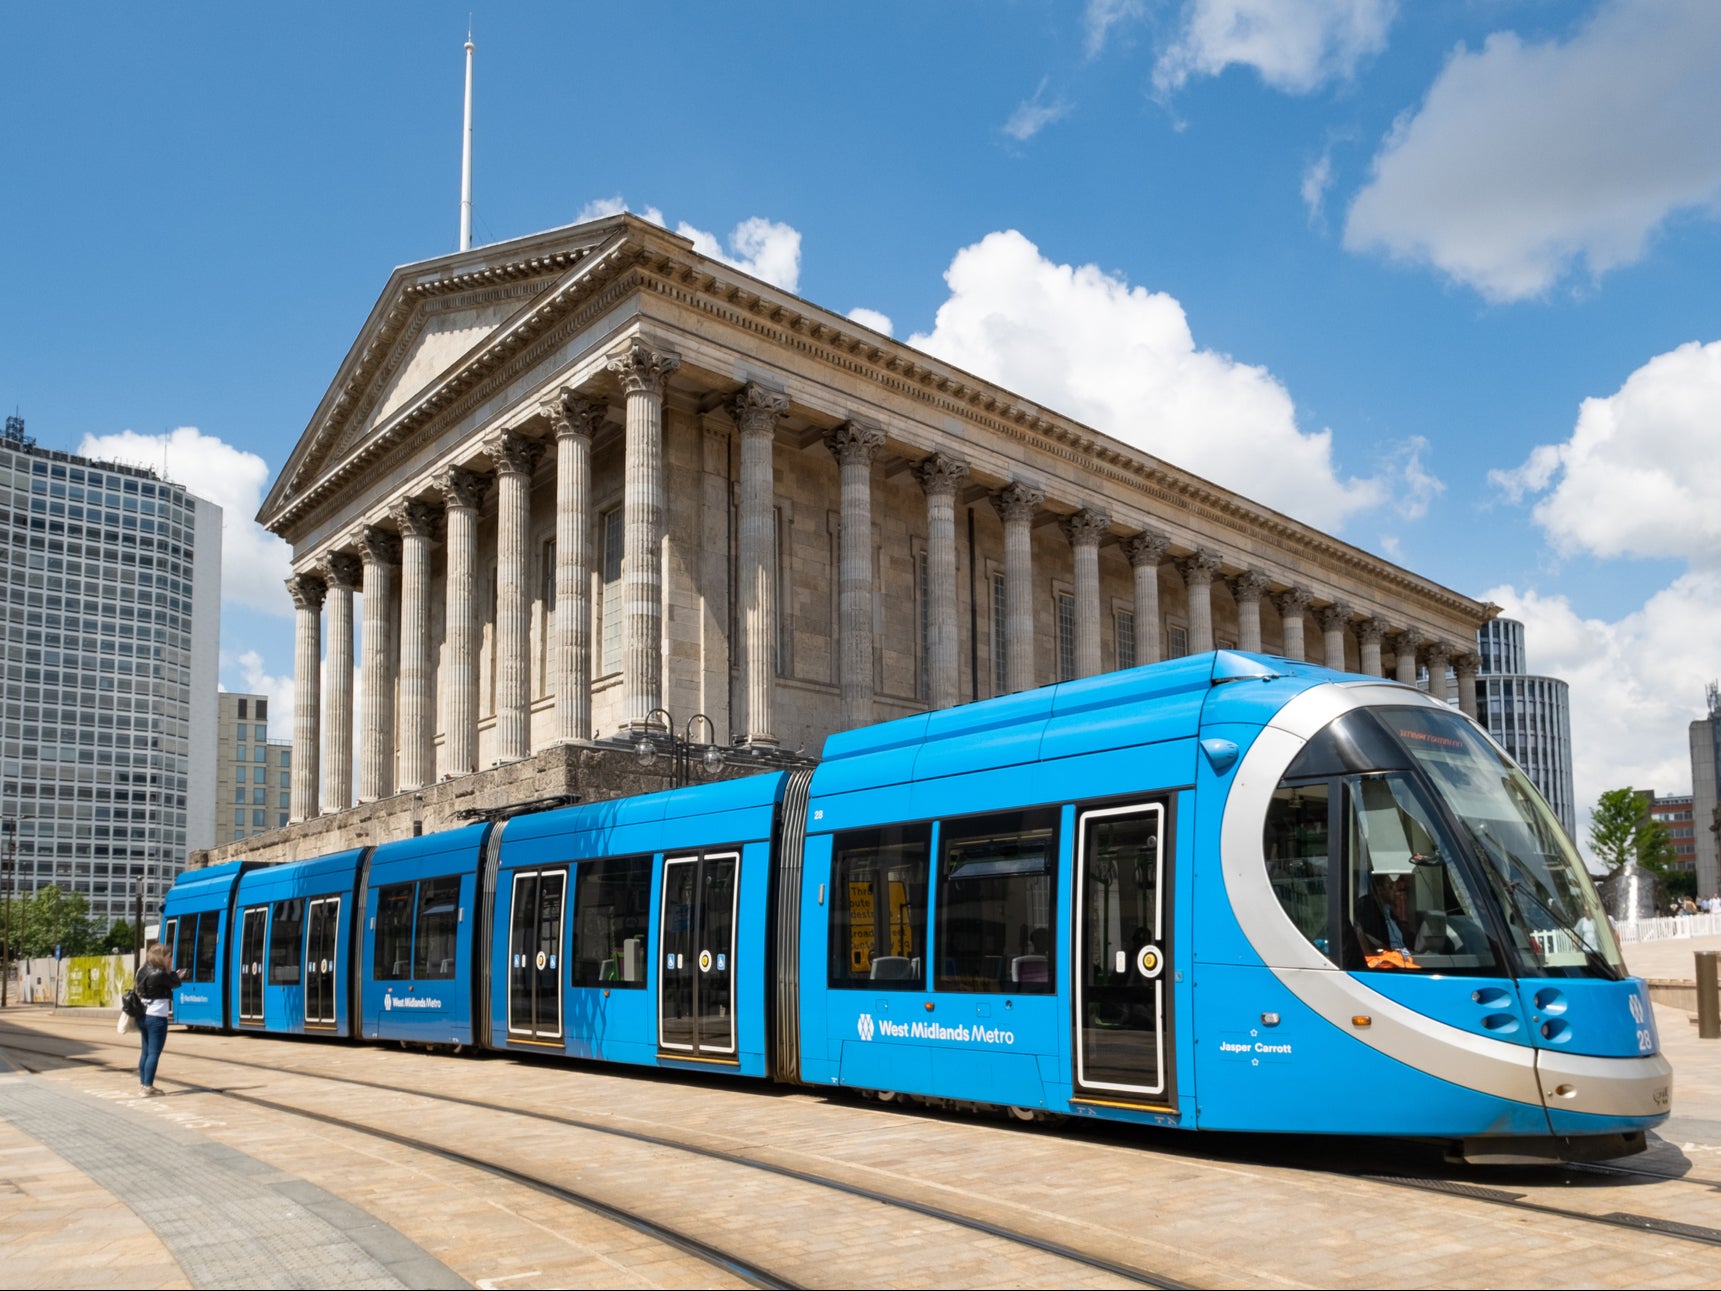 A West Midlands Metro tram in front of Birmingham Town Hall in Victoria Square. The system currently has one line, running between Birmingham and Wolverhampton